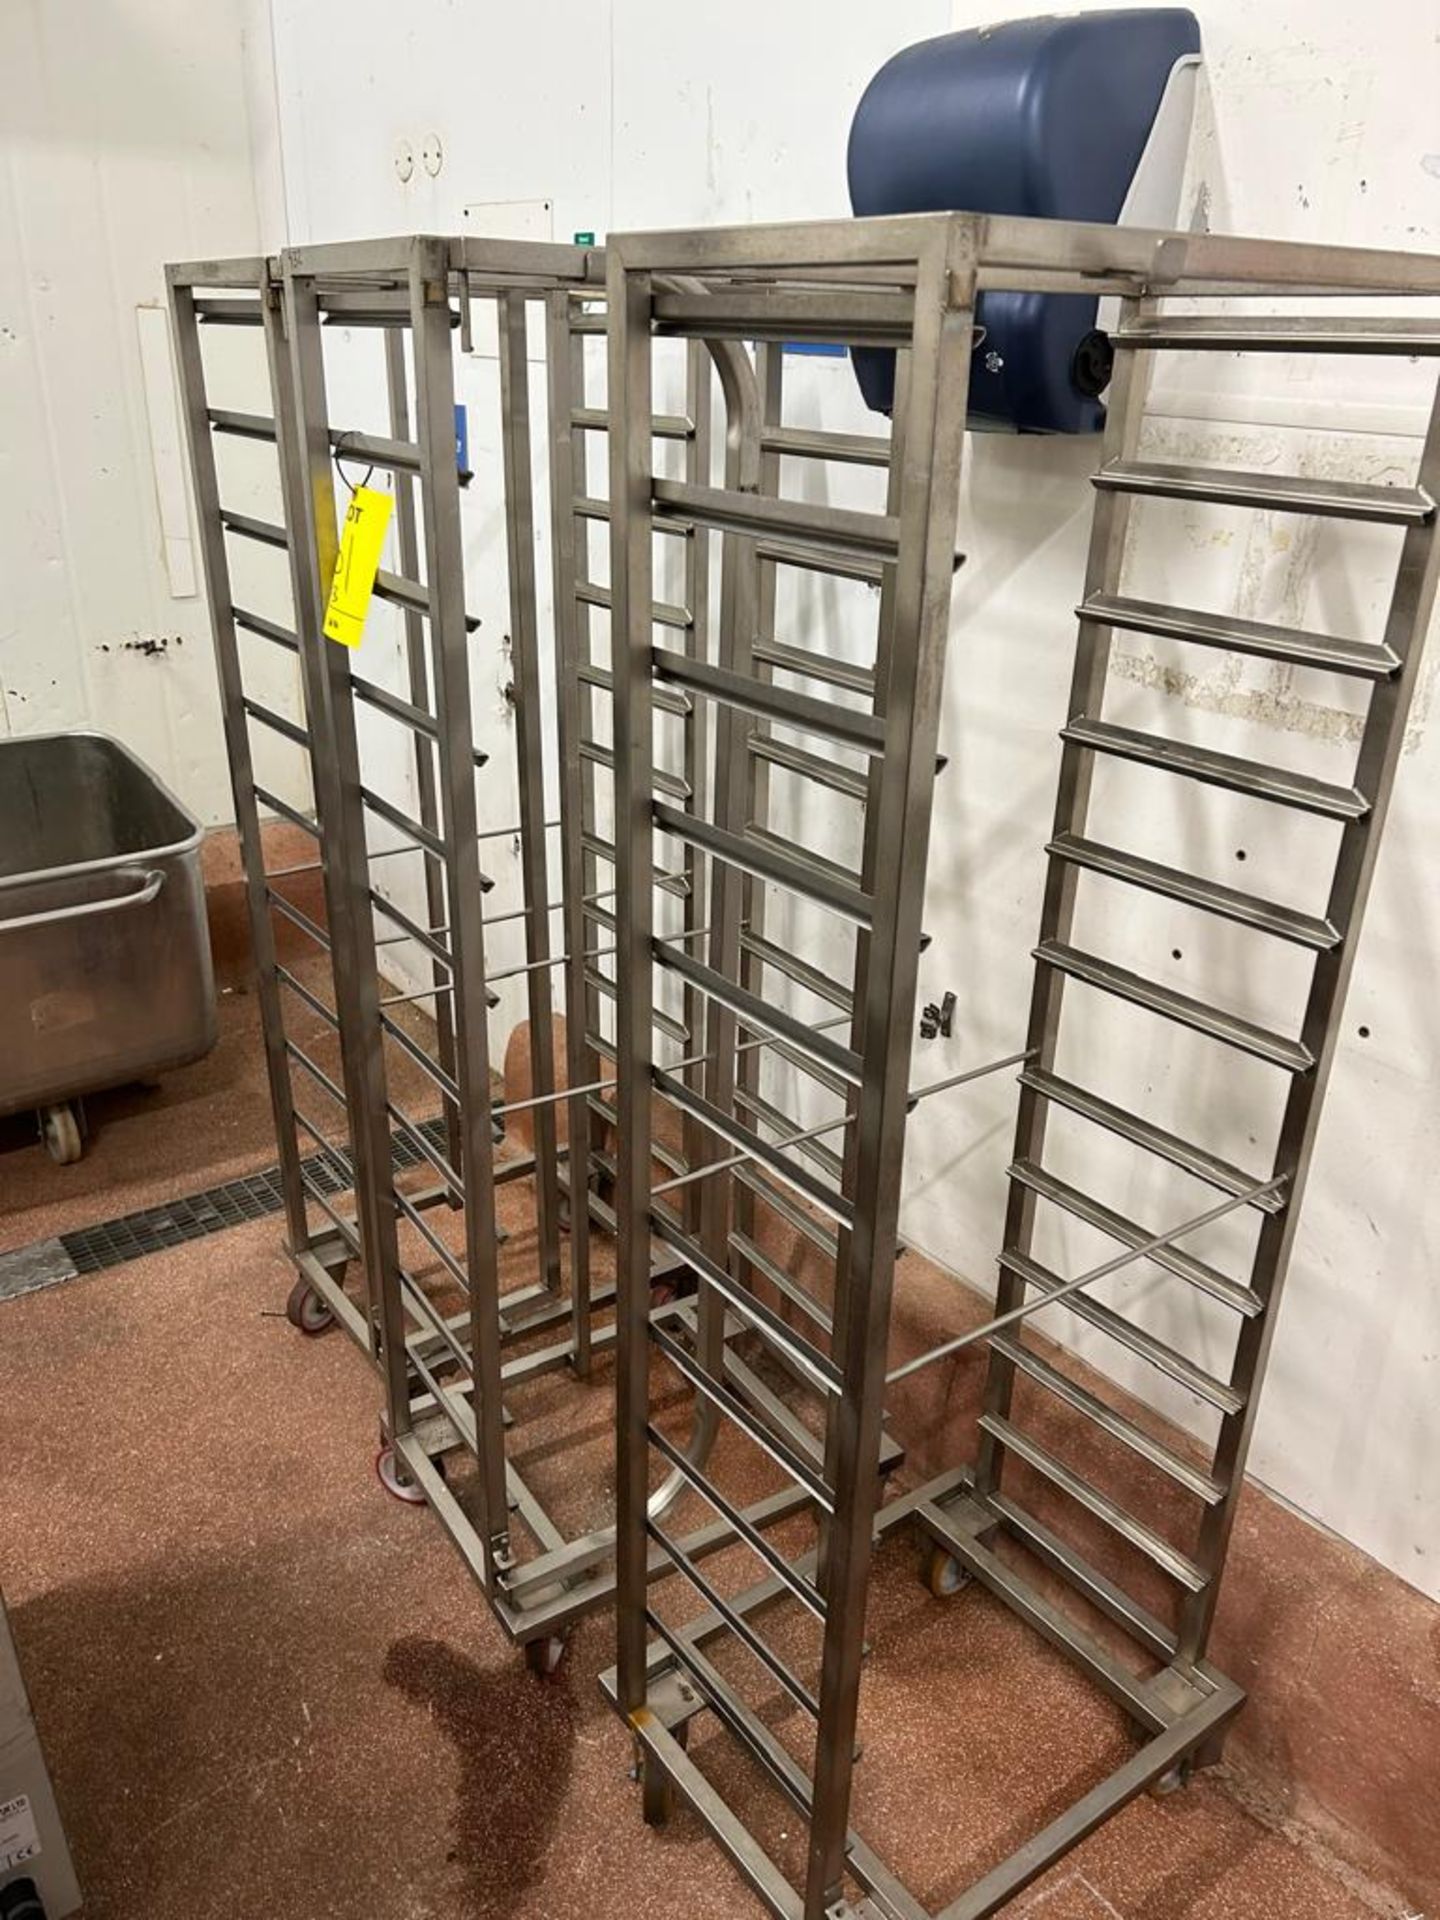 3 X RACKS TROLLEYS TO HOLD 11 TRAYS EACH - Image 2 of 2